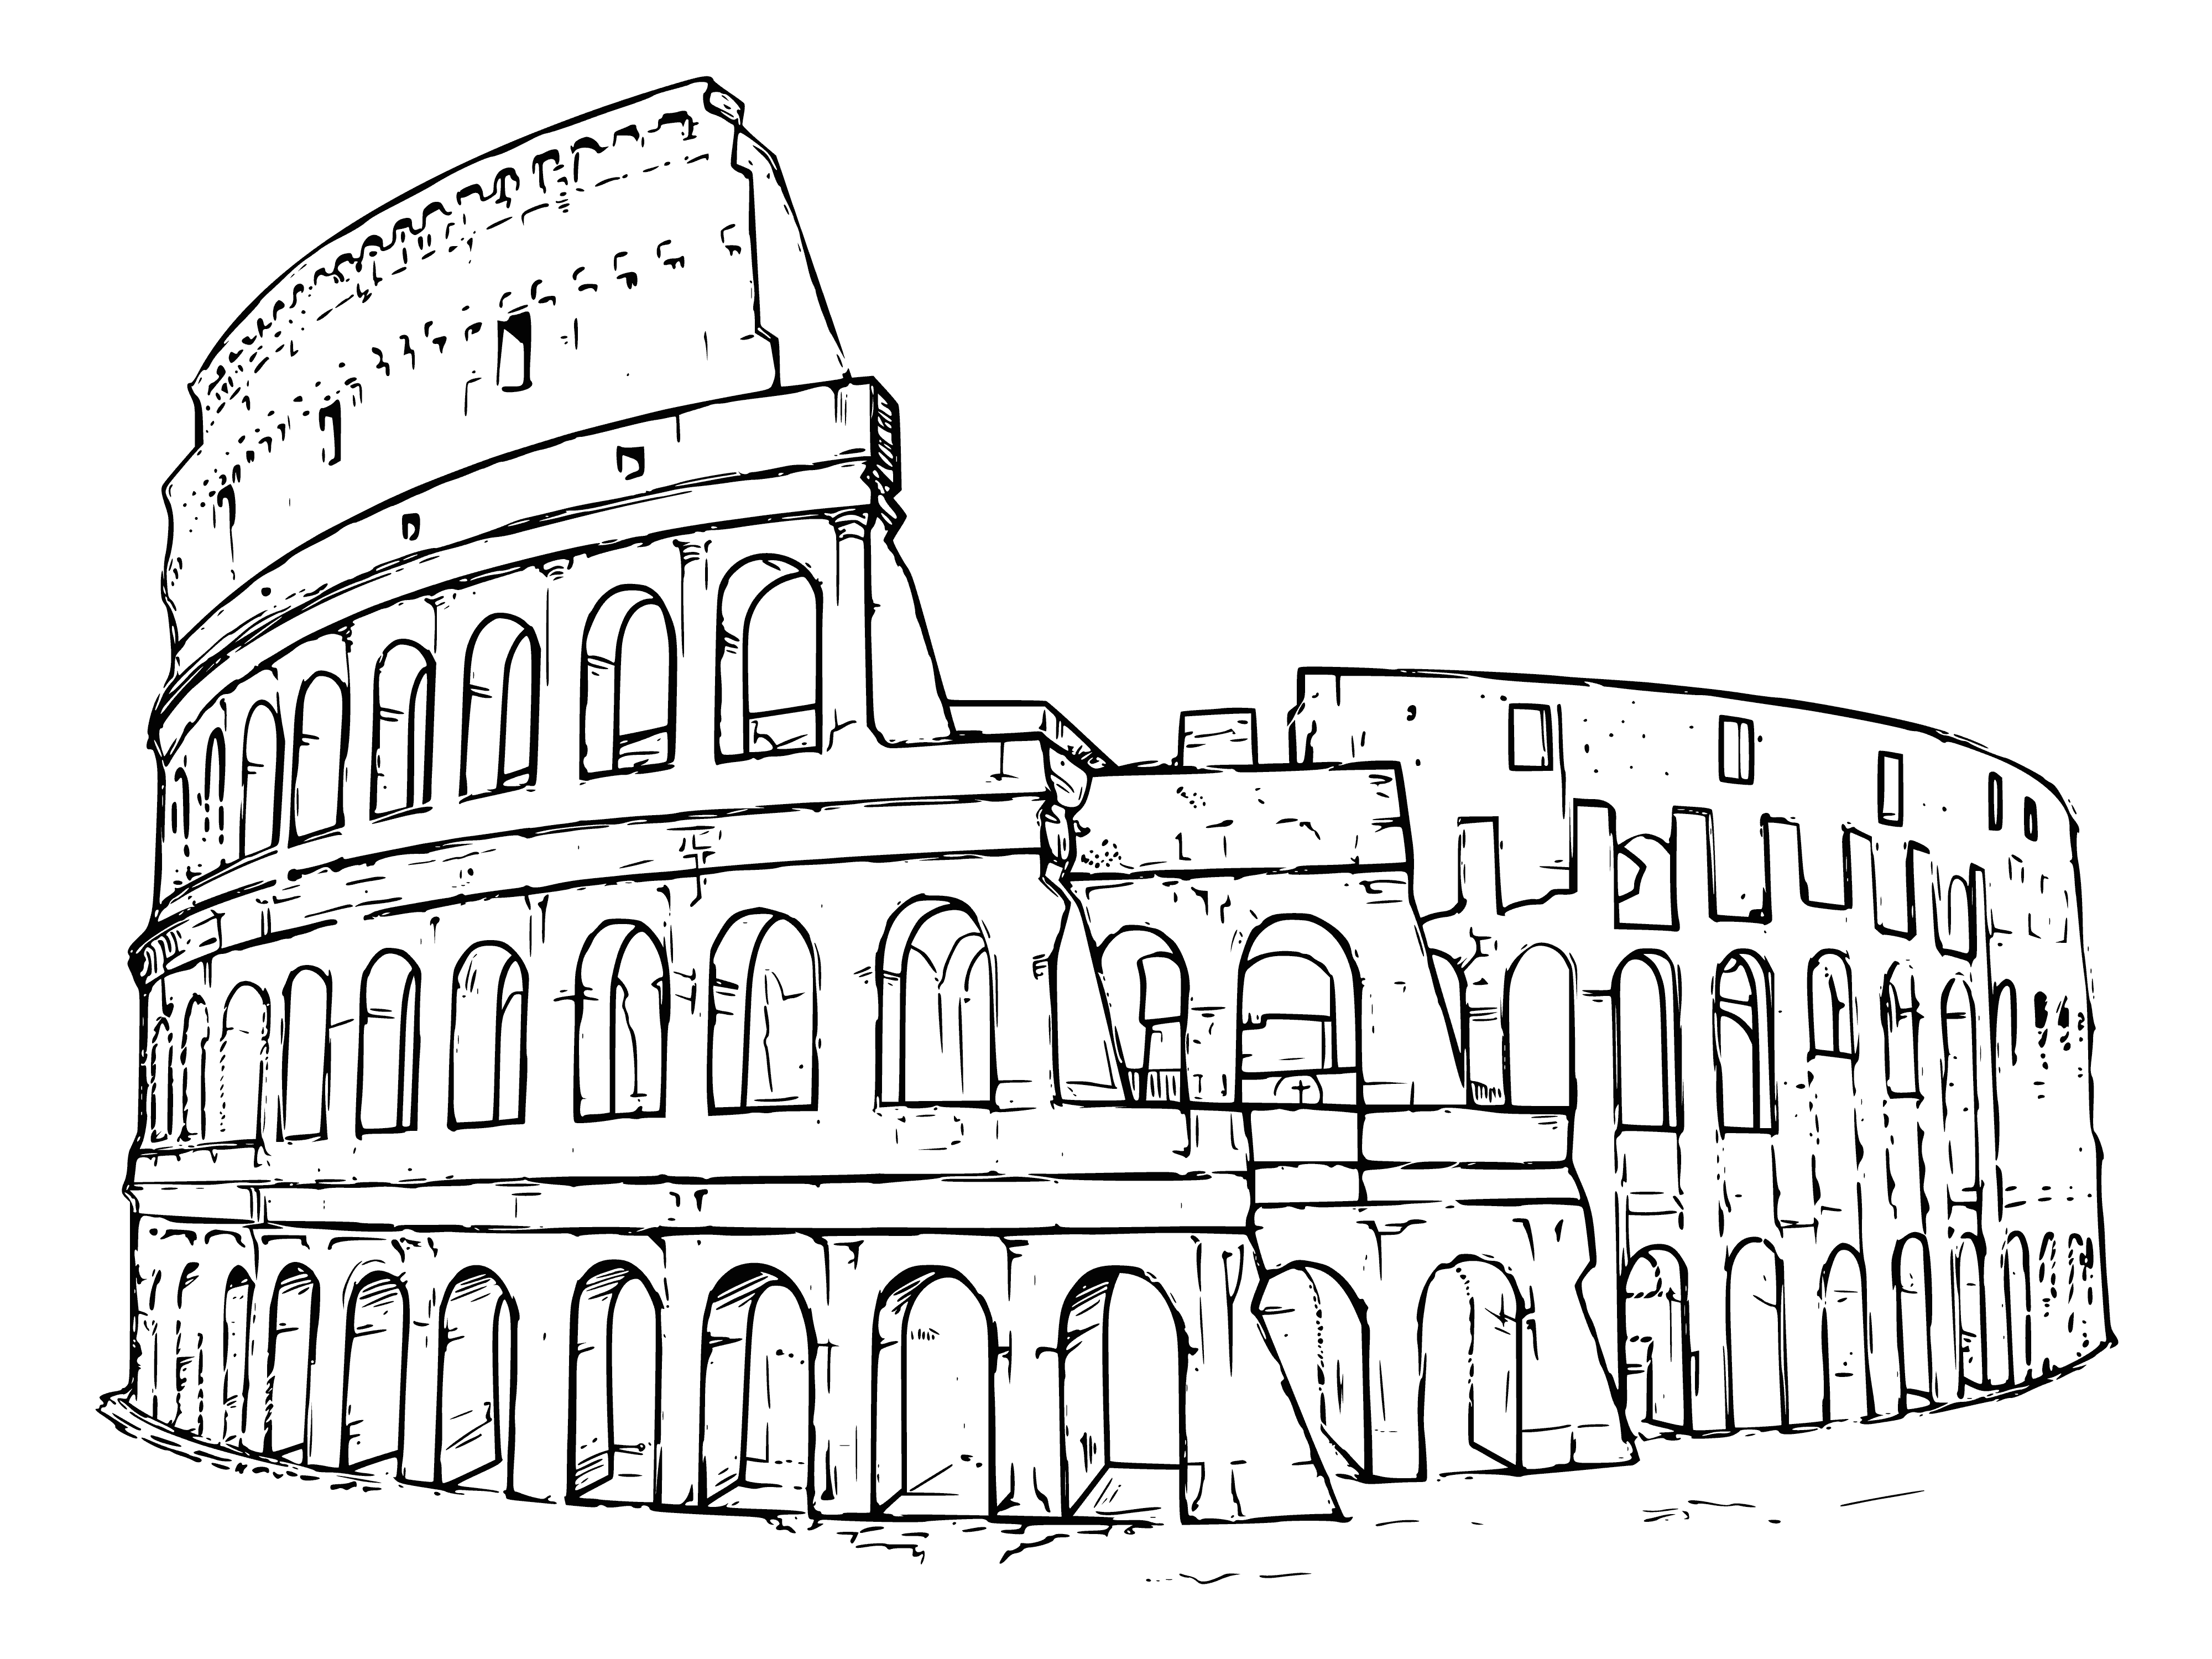 Colosseum in Rome. Italy coloring page